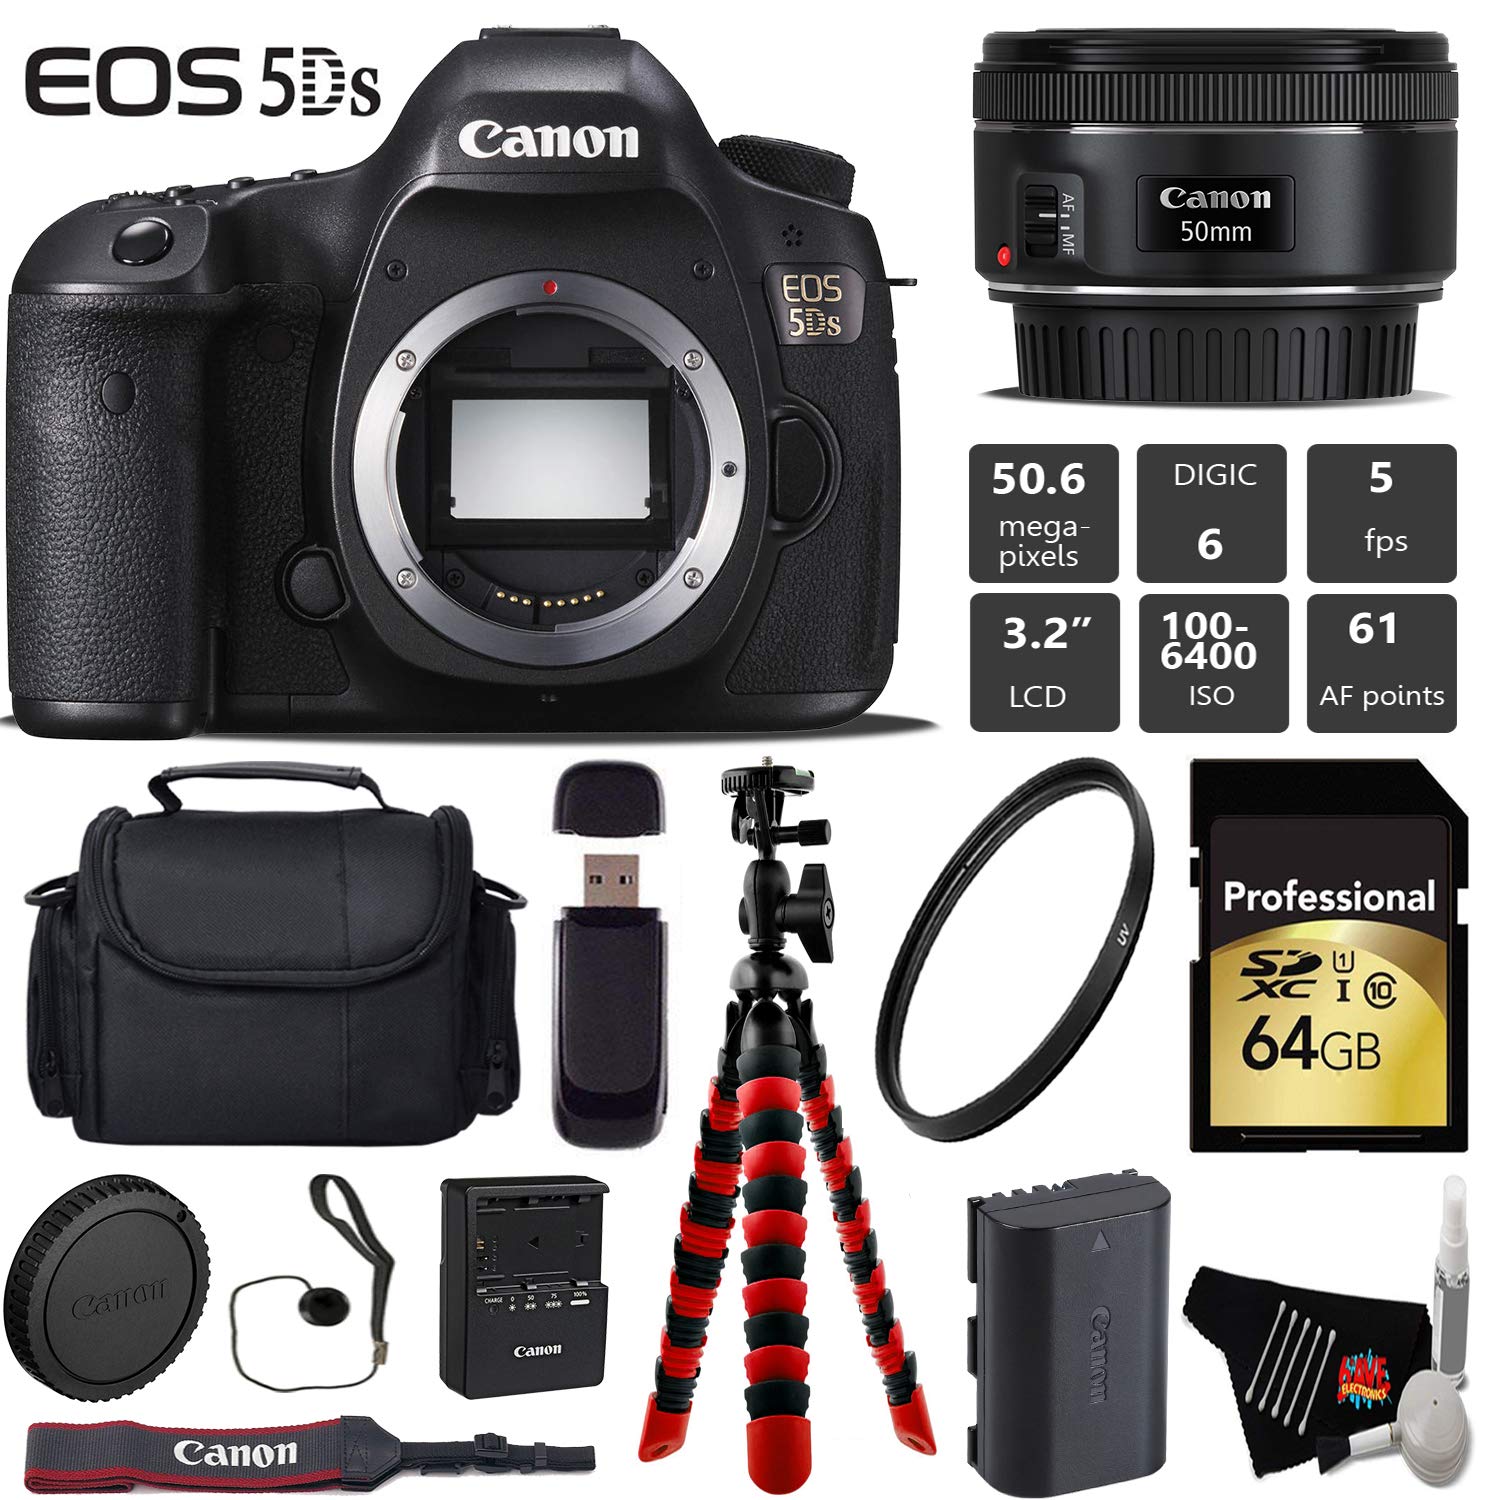 Canon EOS 5DS DSLR Camera with 50mm f/1.8 STM Lens + Wireless Remote + UV Protection Filter + Case + Wrist Strap Pro Bundle